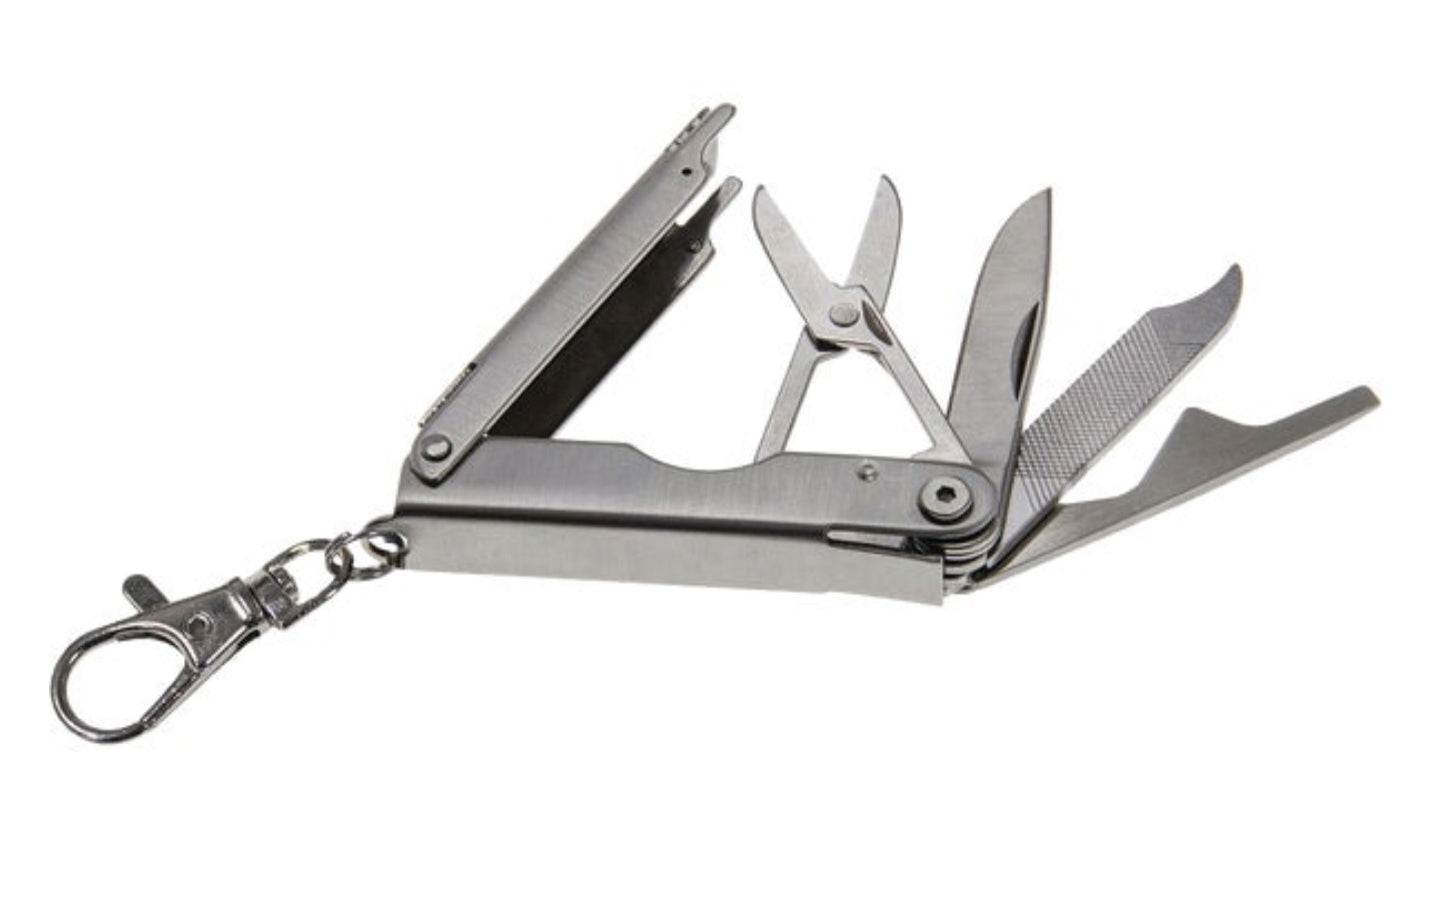 6-In-1 Stainless Compact Multi-Tool Keychain – Hardwick & Sons